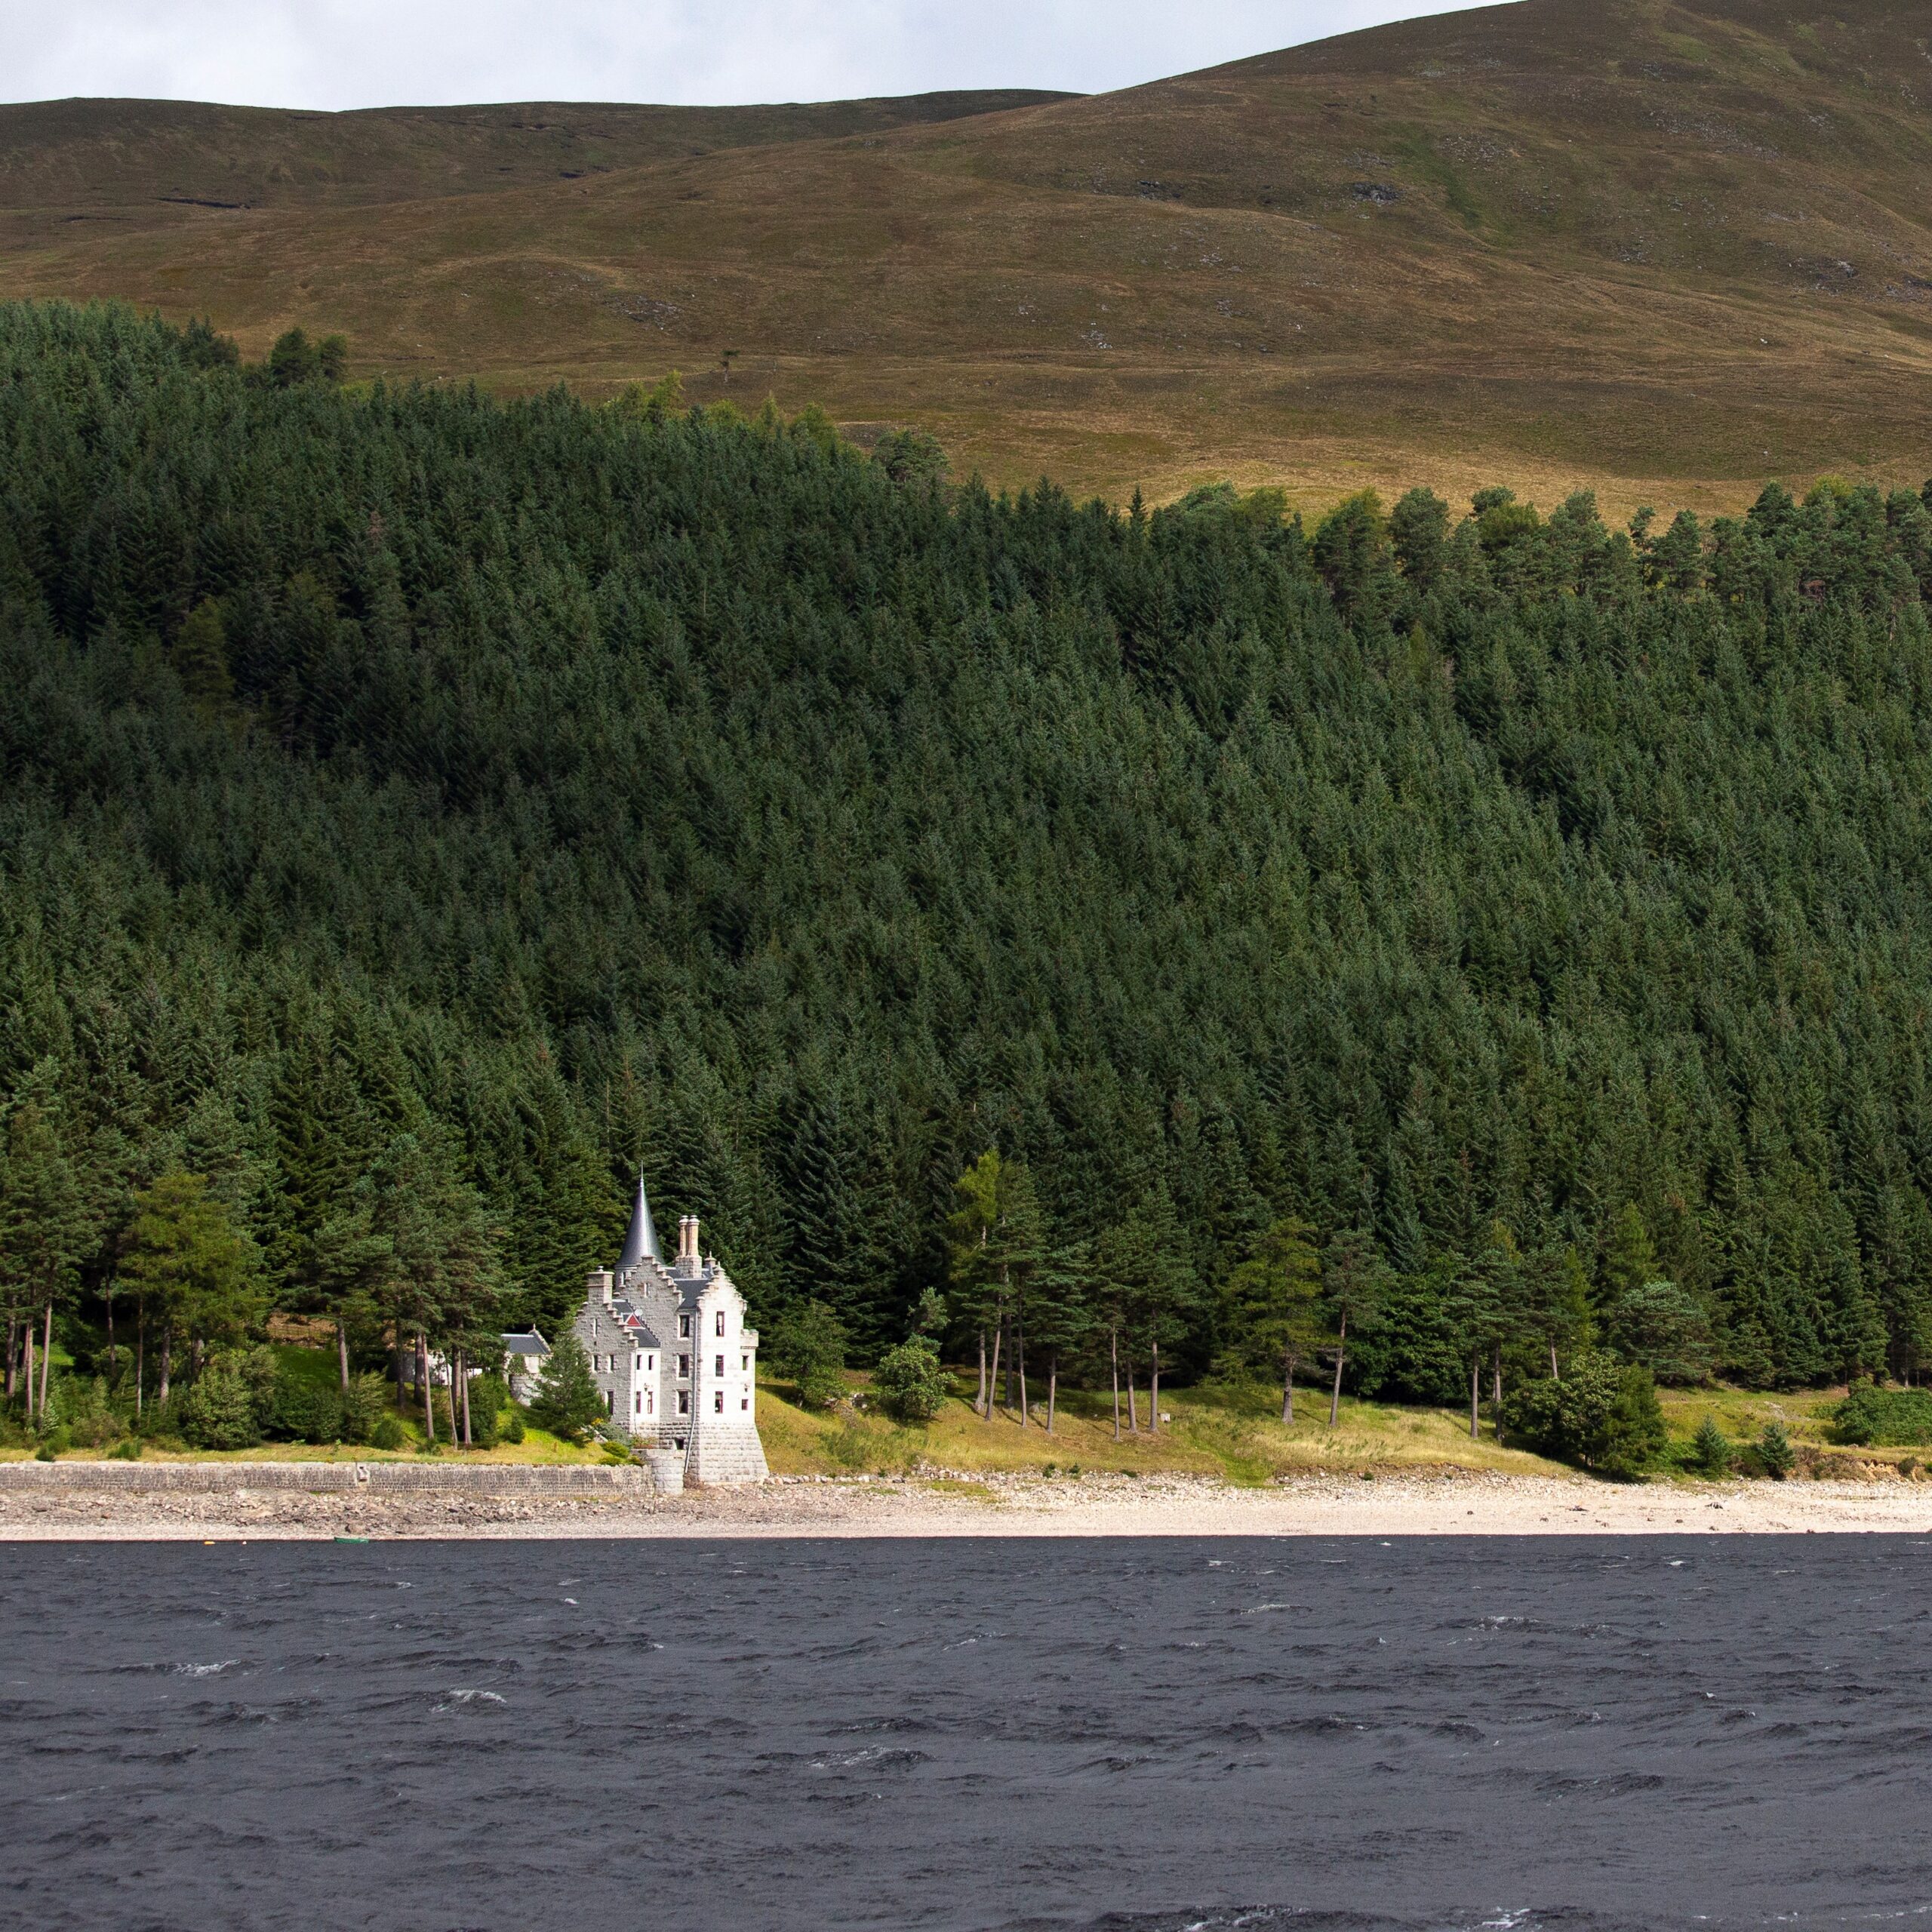 lodge-with-turret-at-edge-of-loch-and-forest-in-background